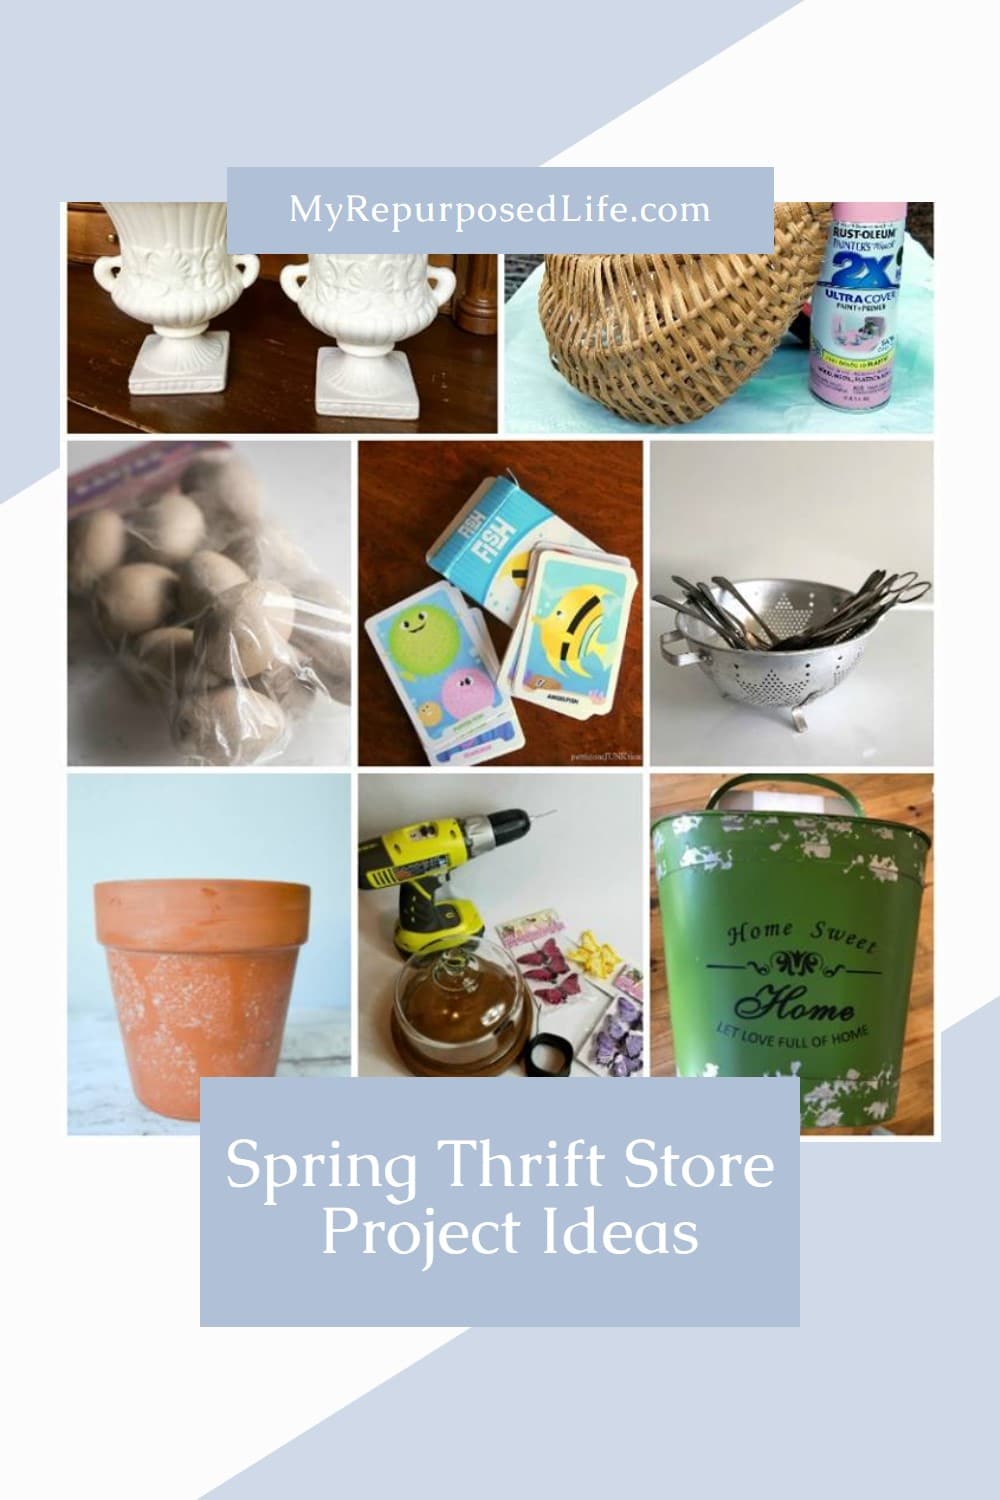 Spring Project ideas using thrift store items! Maybe you have some of these items at home already. Easy outdoor projects. Easy Home Decor projects to DIY. #MyRepurposedLife via @repurposedlife